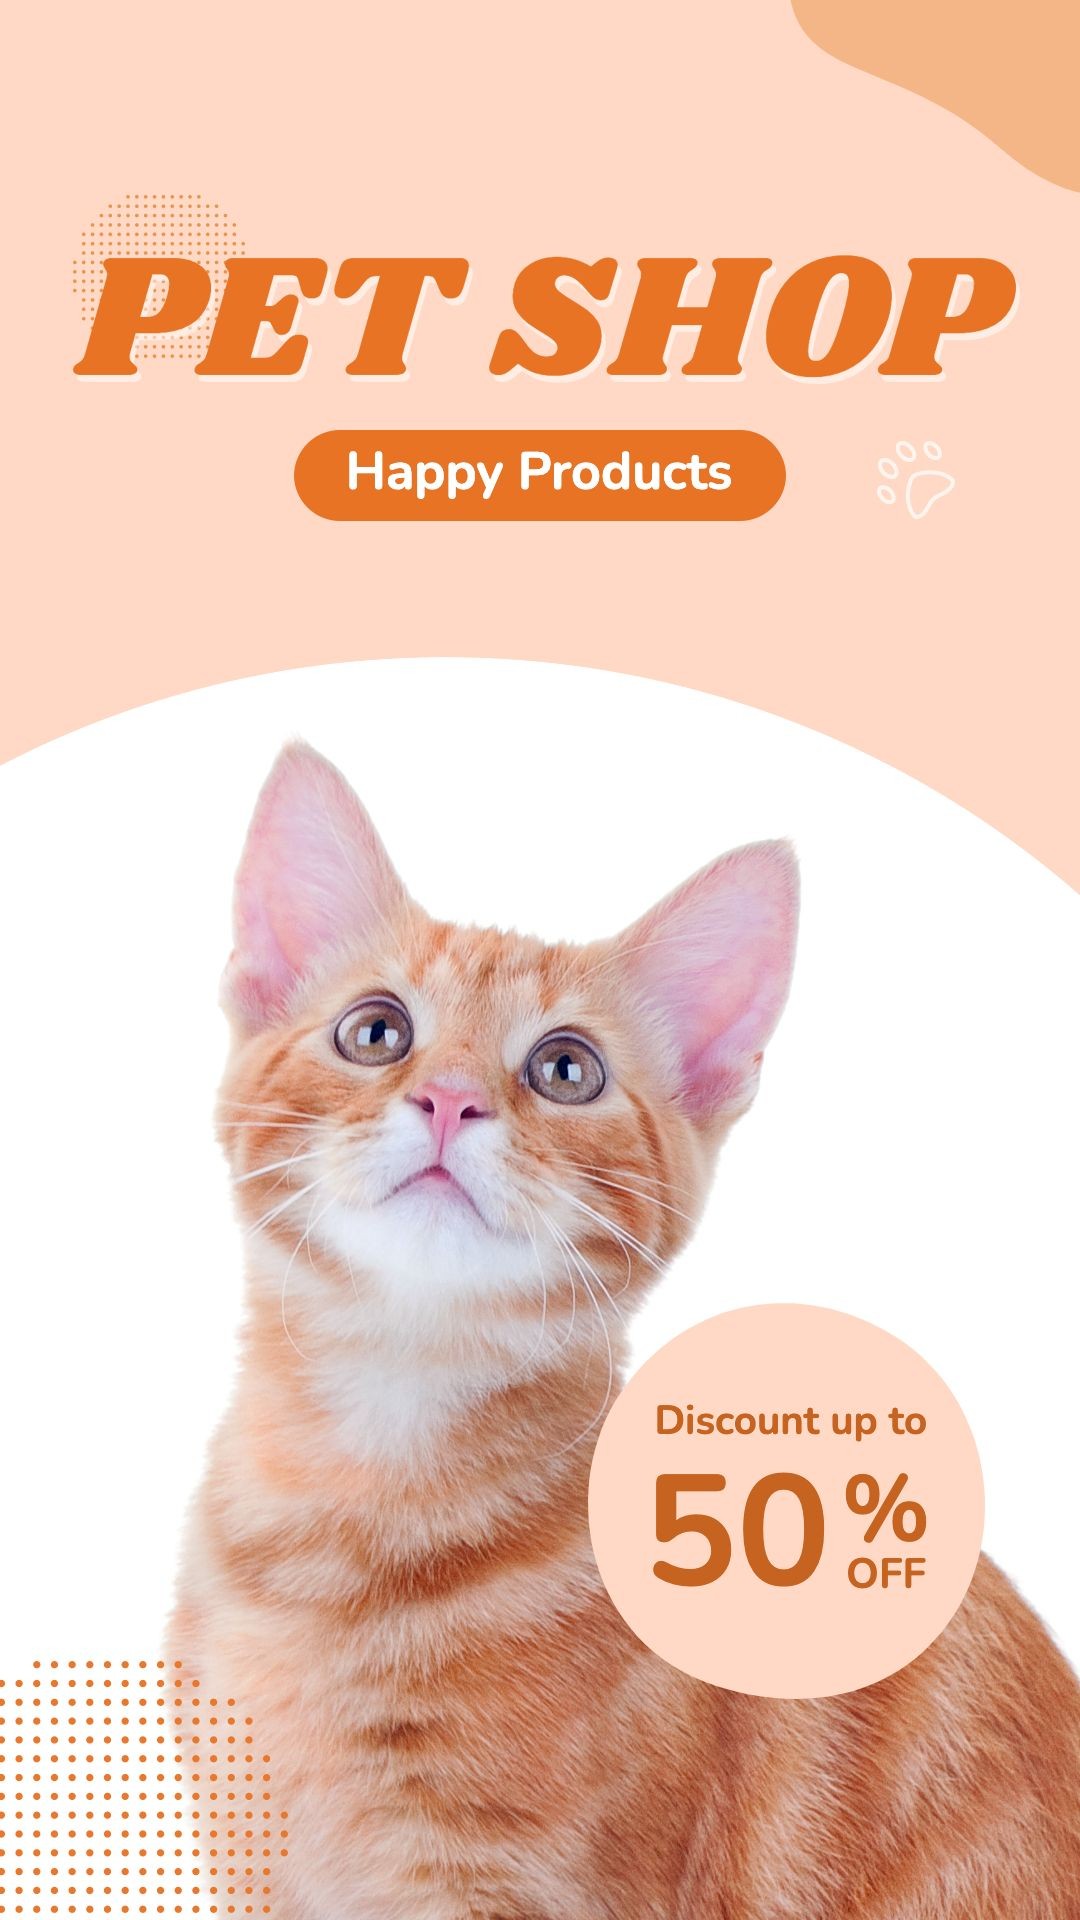 Number Element Cute Style Pet Product Supplies Sale Promo Ecommerce Story预览效果